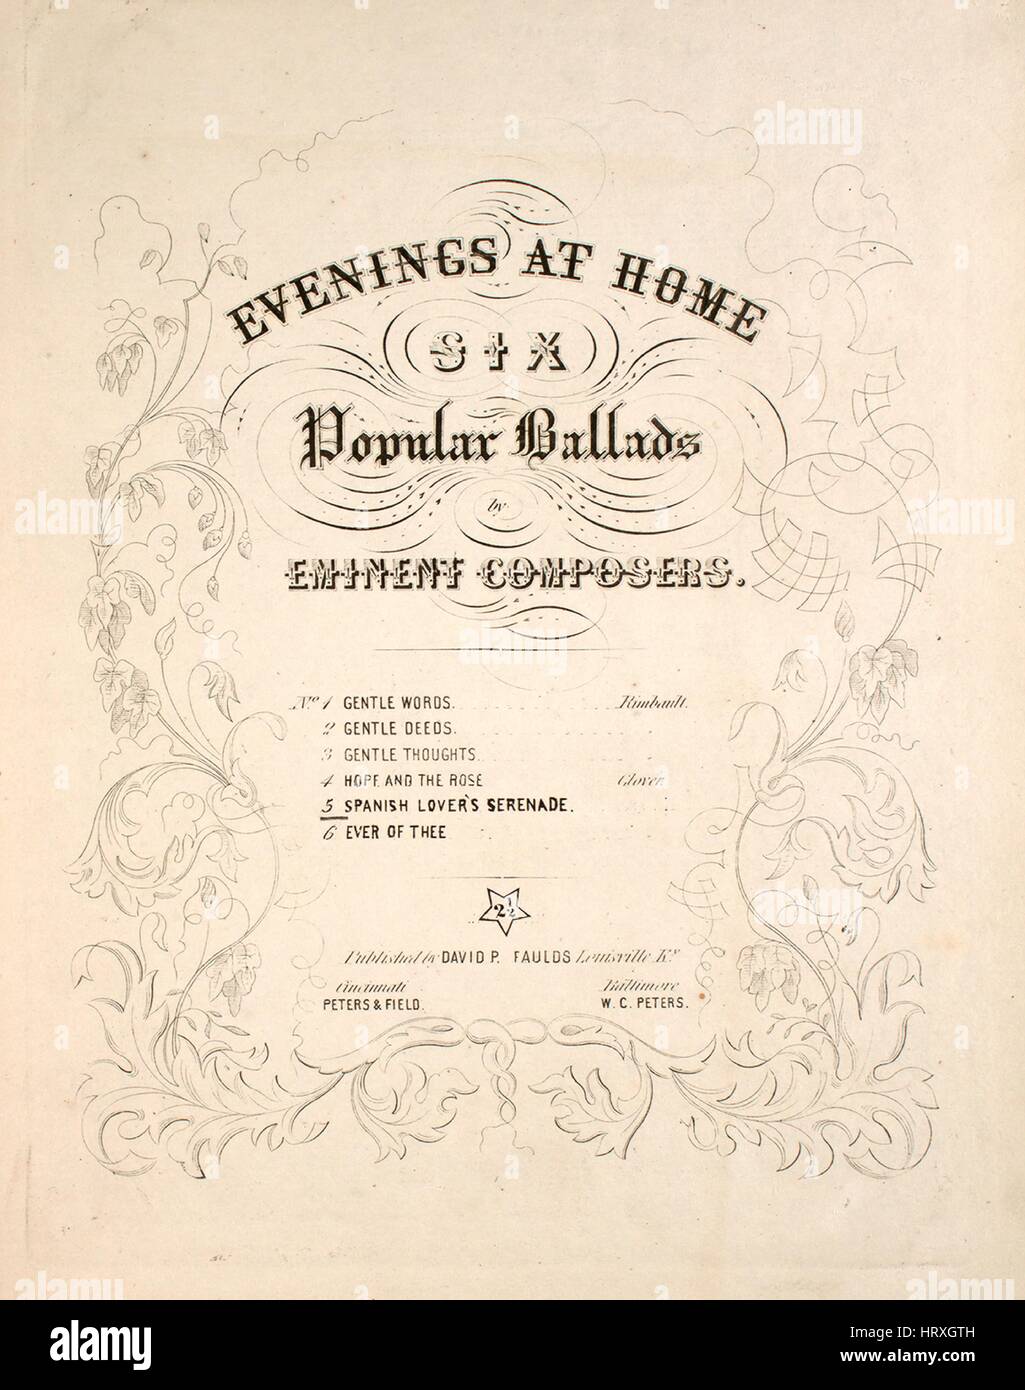 Sheet music cover image of the song 'Evenings at Home Six Popular Ballads by Eminent Composers No 5 Spanish Lover's Serenade Ta Resille [English and French]', with original authorship notes reading 'na', 1853. The publisher is listed as 'David P. Faulds', the form of composition is 'strophic', the instrumentation is 'piano and voice', the first line reads 'Thy black eye whose brightness flashes underneath the silken lashes', and the illustration artist is listed as 'J. Slinglandt, Engvr. and Pr.'. Stock Photo